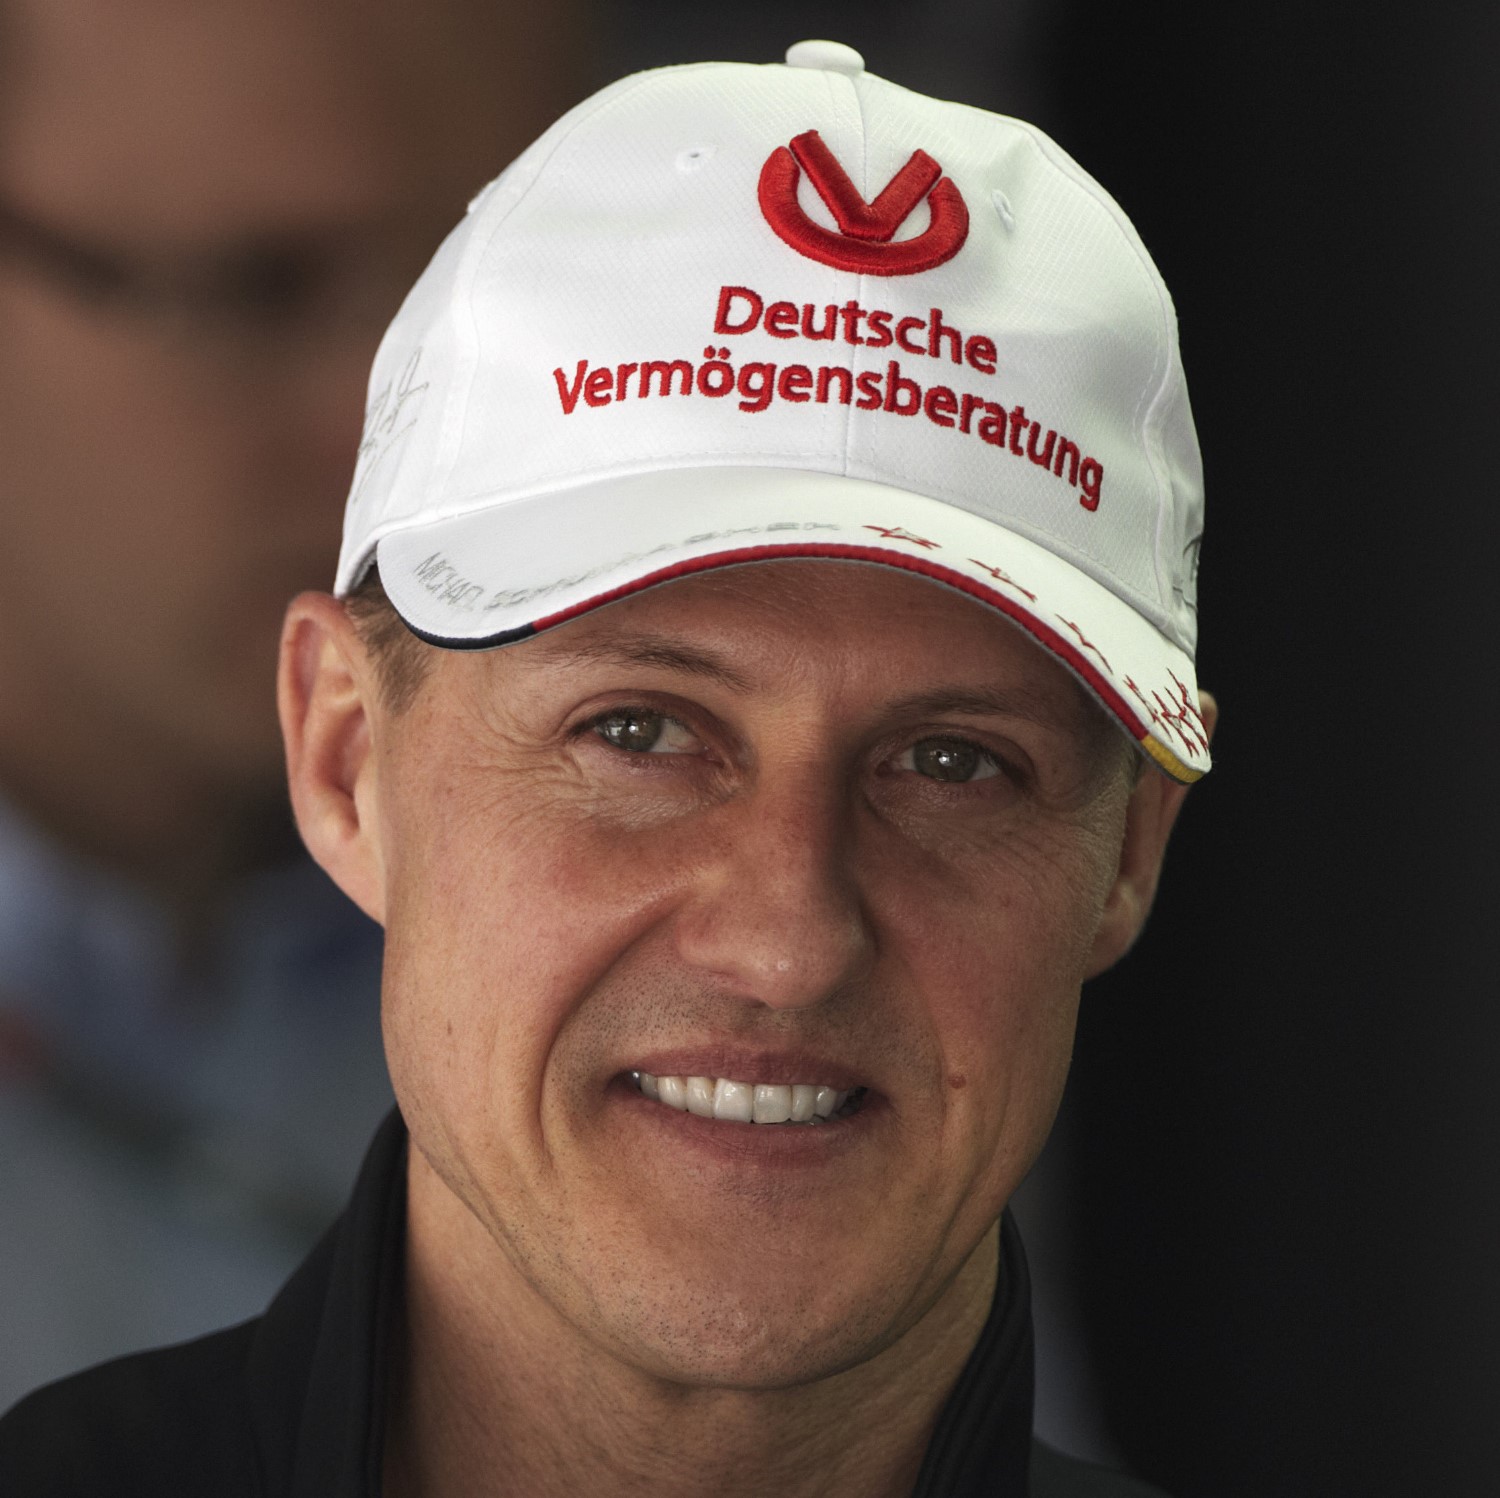 How is Schumacher, we just don't know.